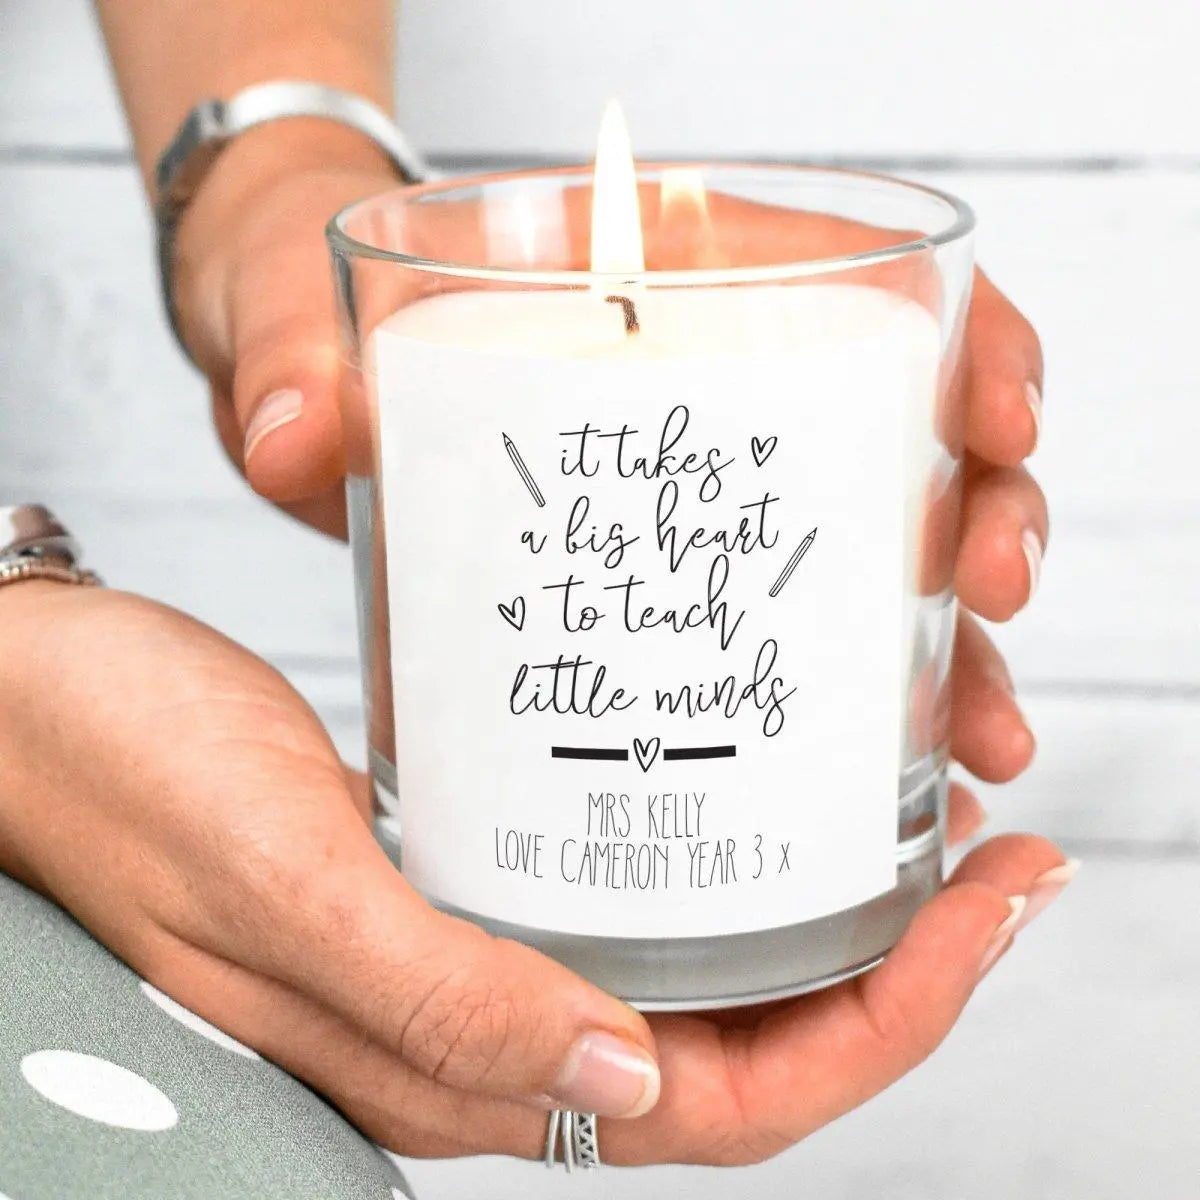 Personalised Teacher Candle, Teacher Gift Candle, Personalised Teacher Gifts, Personalised Candles, Teaching Assistant Gifts, Thank You Gift - Amy Lucy